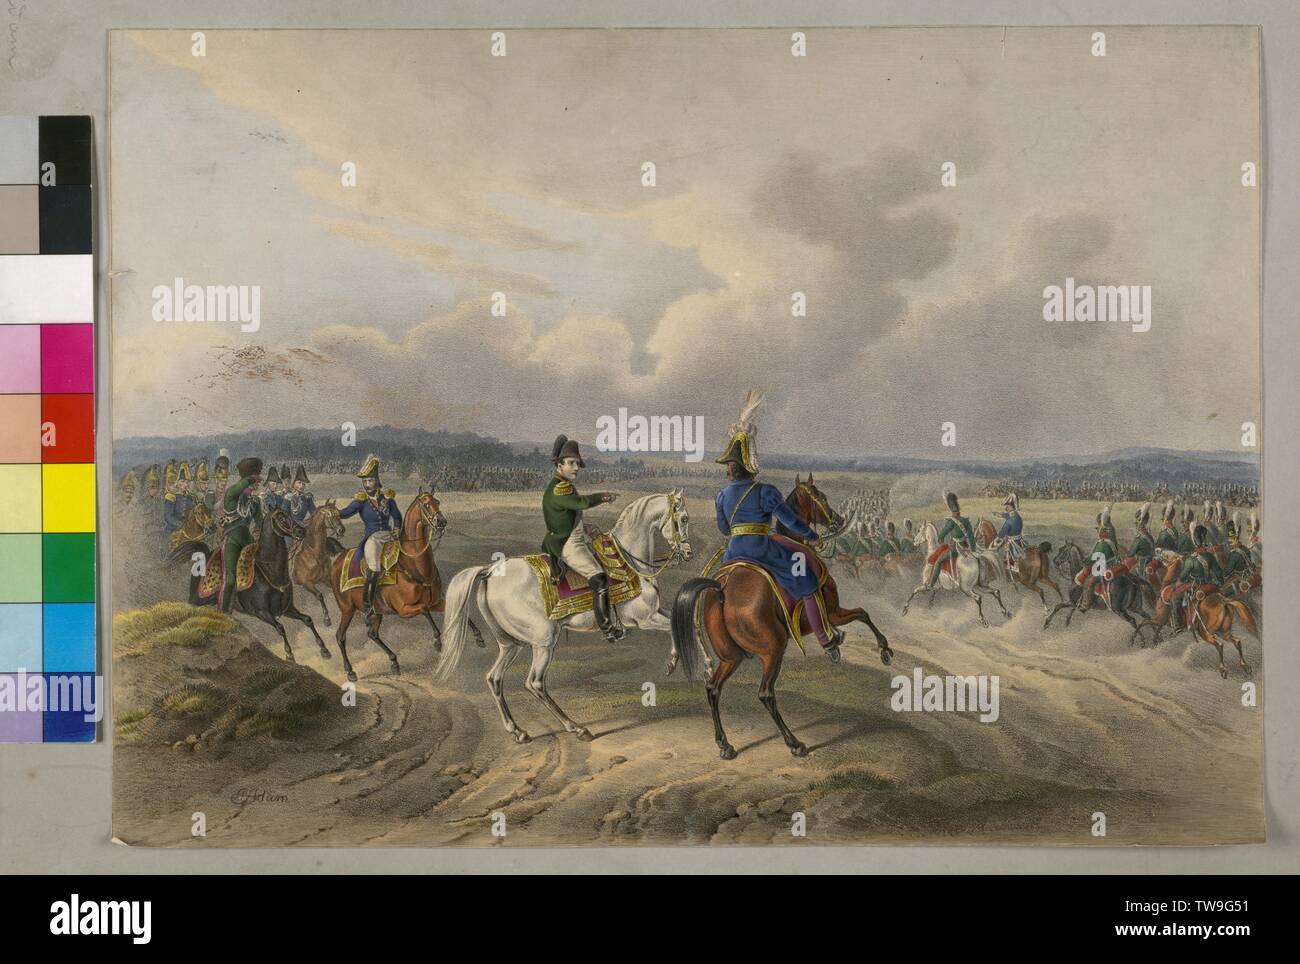 Napoleon I at the Duena, 1812, German Invasion of the Soviet Union 1812: Napoleon I Bonaparte, Emperor of the French, on 24.7.1812 together with Bavarian regiments at the Duena. coloured lithograph by Albrecht Adam, signed, circa 1812, Additional-Rights-Clearance-Info-Not-Available Stock Photo